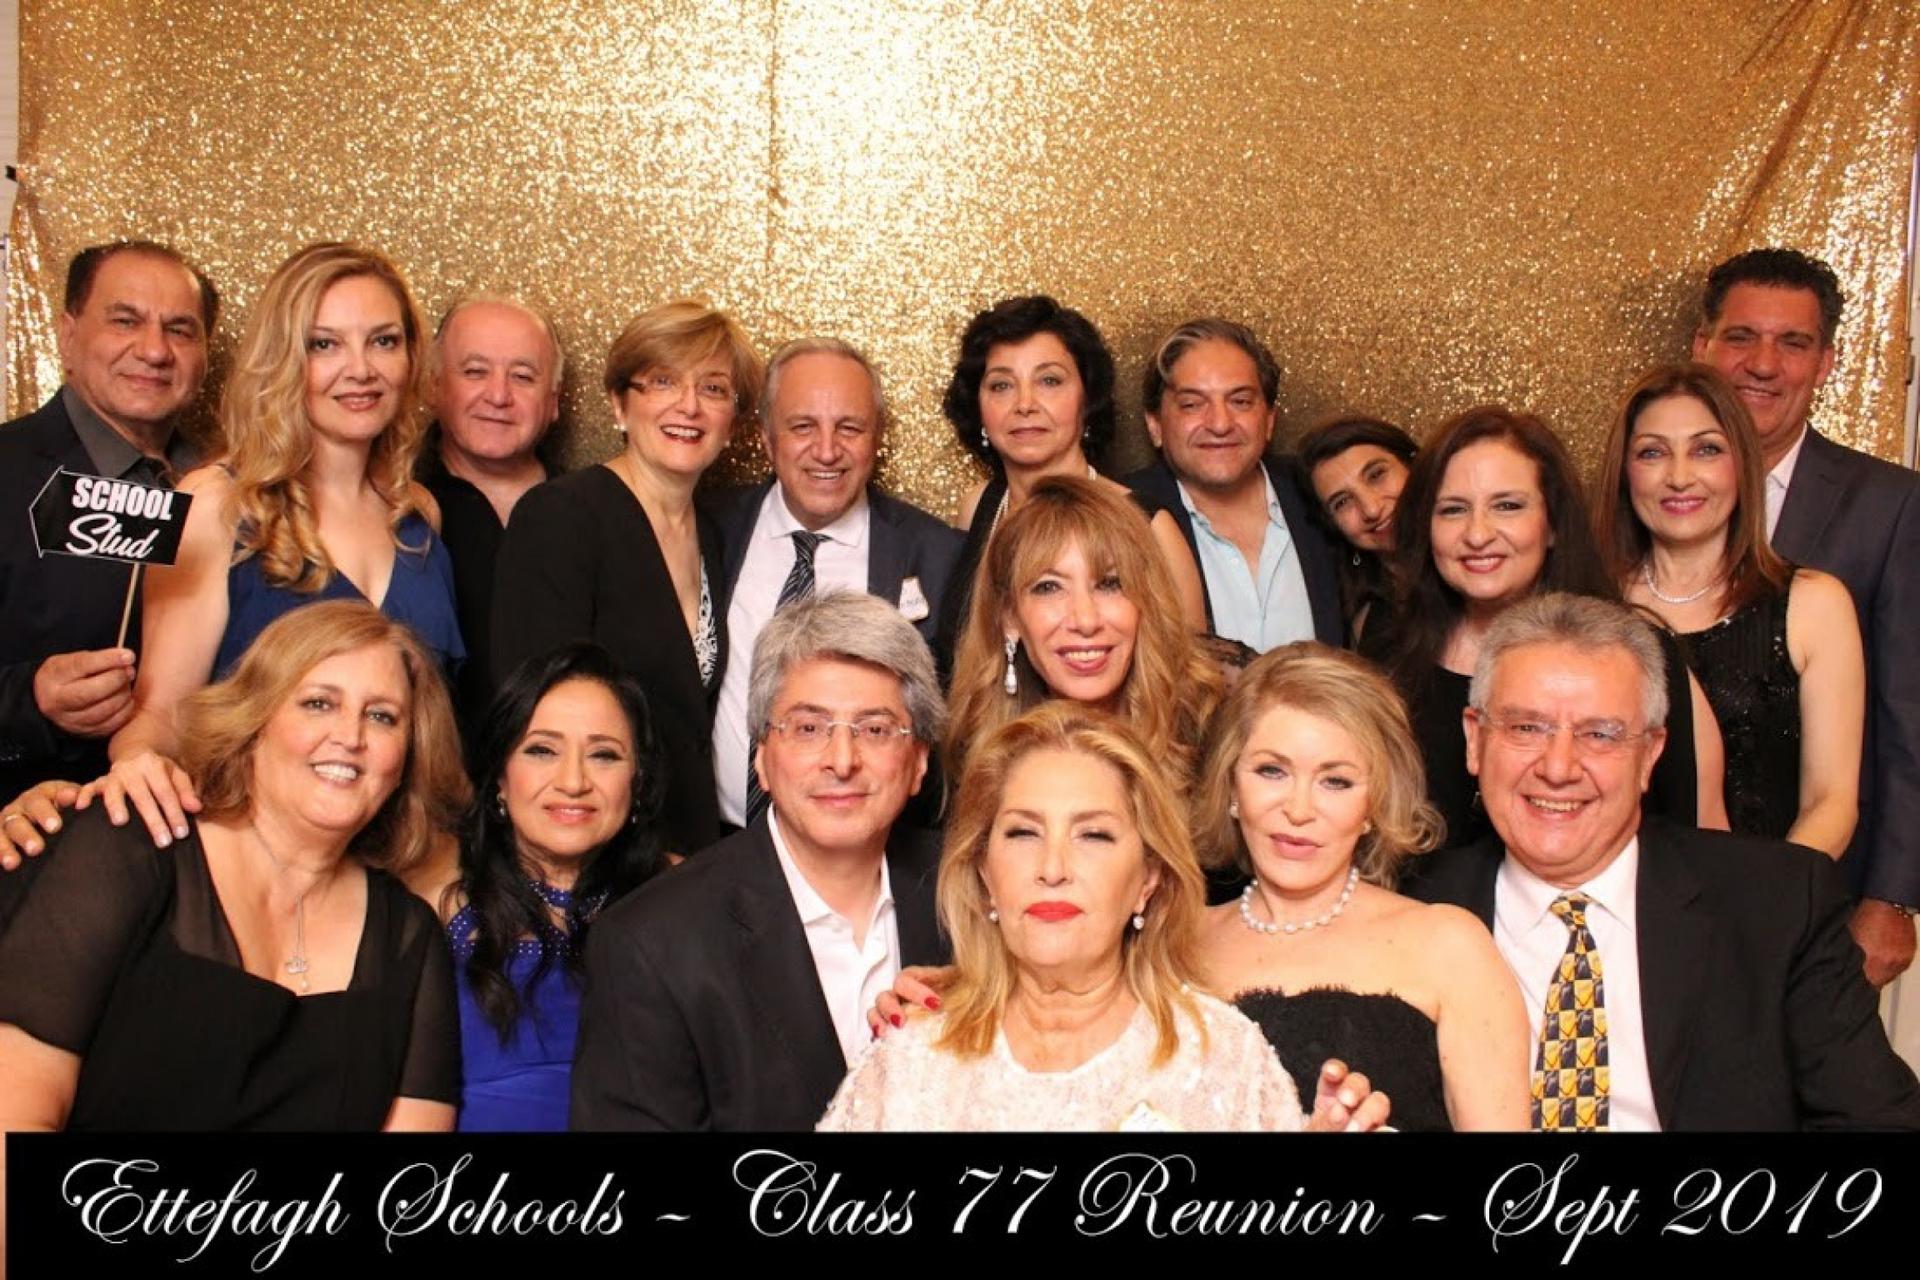 Former Ettefagh School classmates settled around the United States, Canada and Israel after leaving Iran around the time of the 1979 Islamic Revolution. On Sept. 1, 2019, about 50 alumni came from around the world to attend their first formal high school 